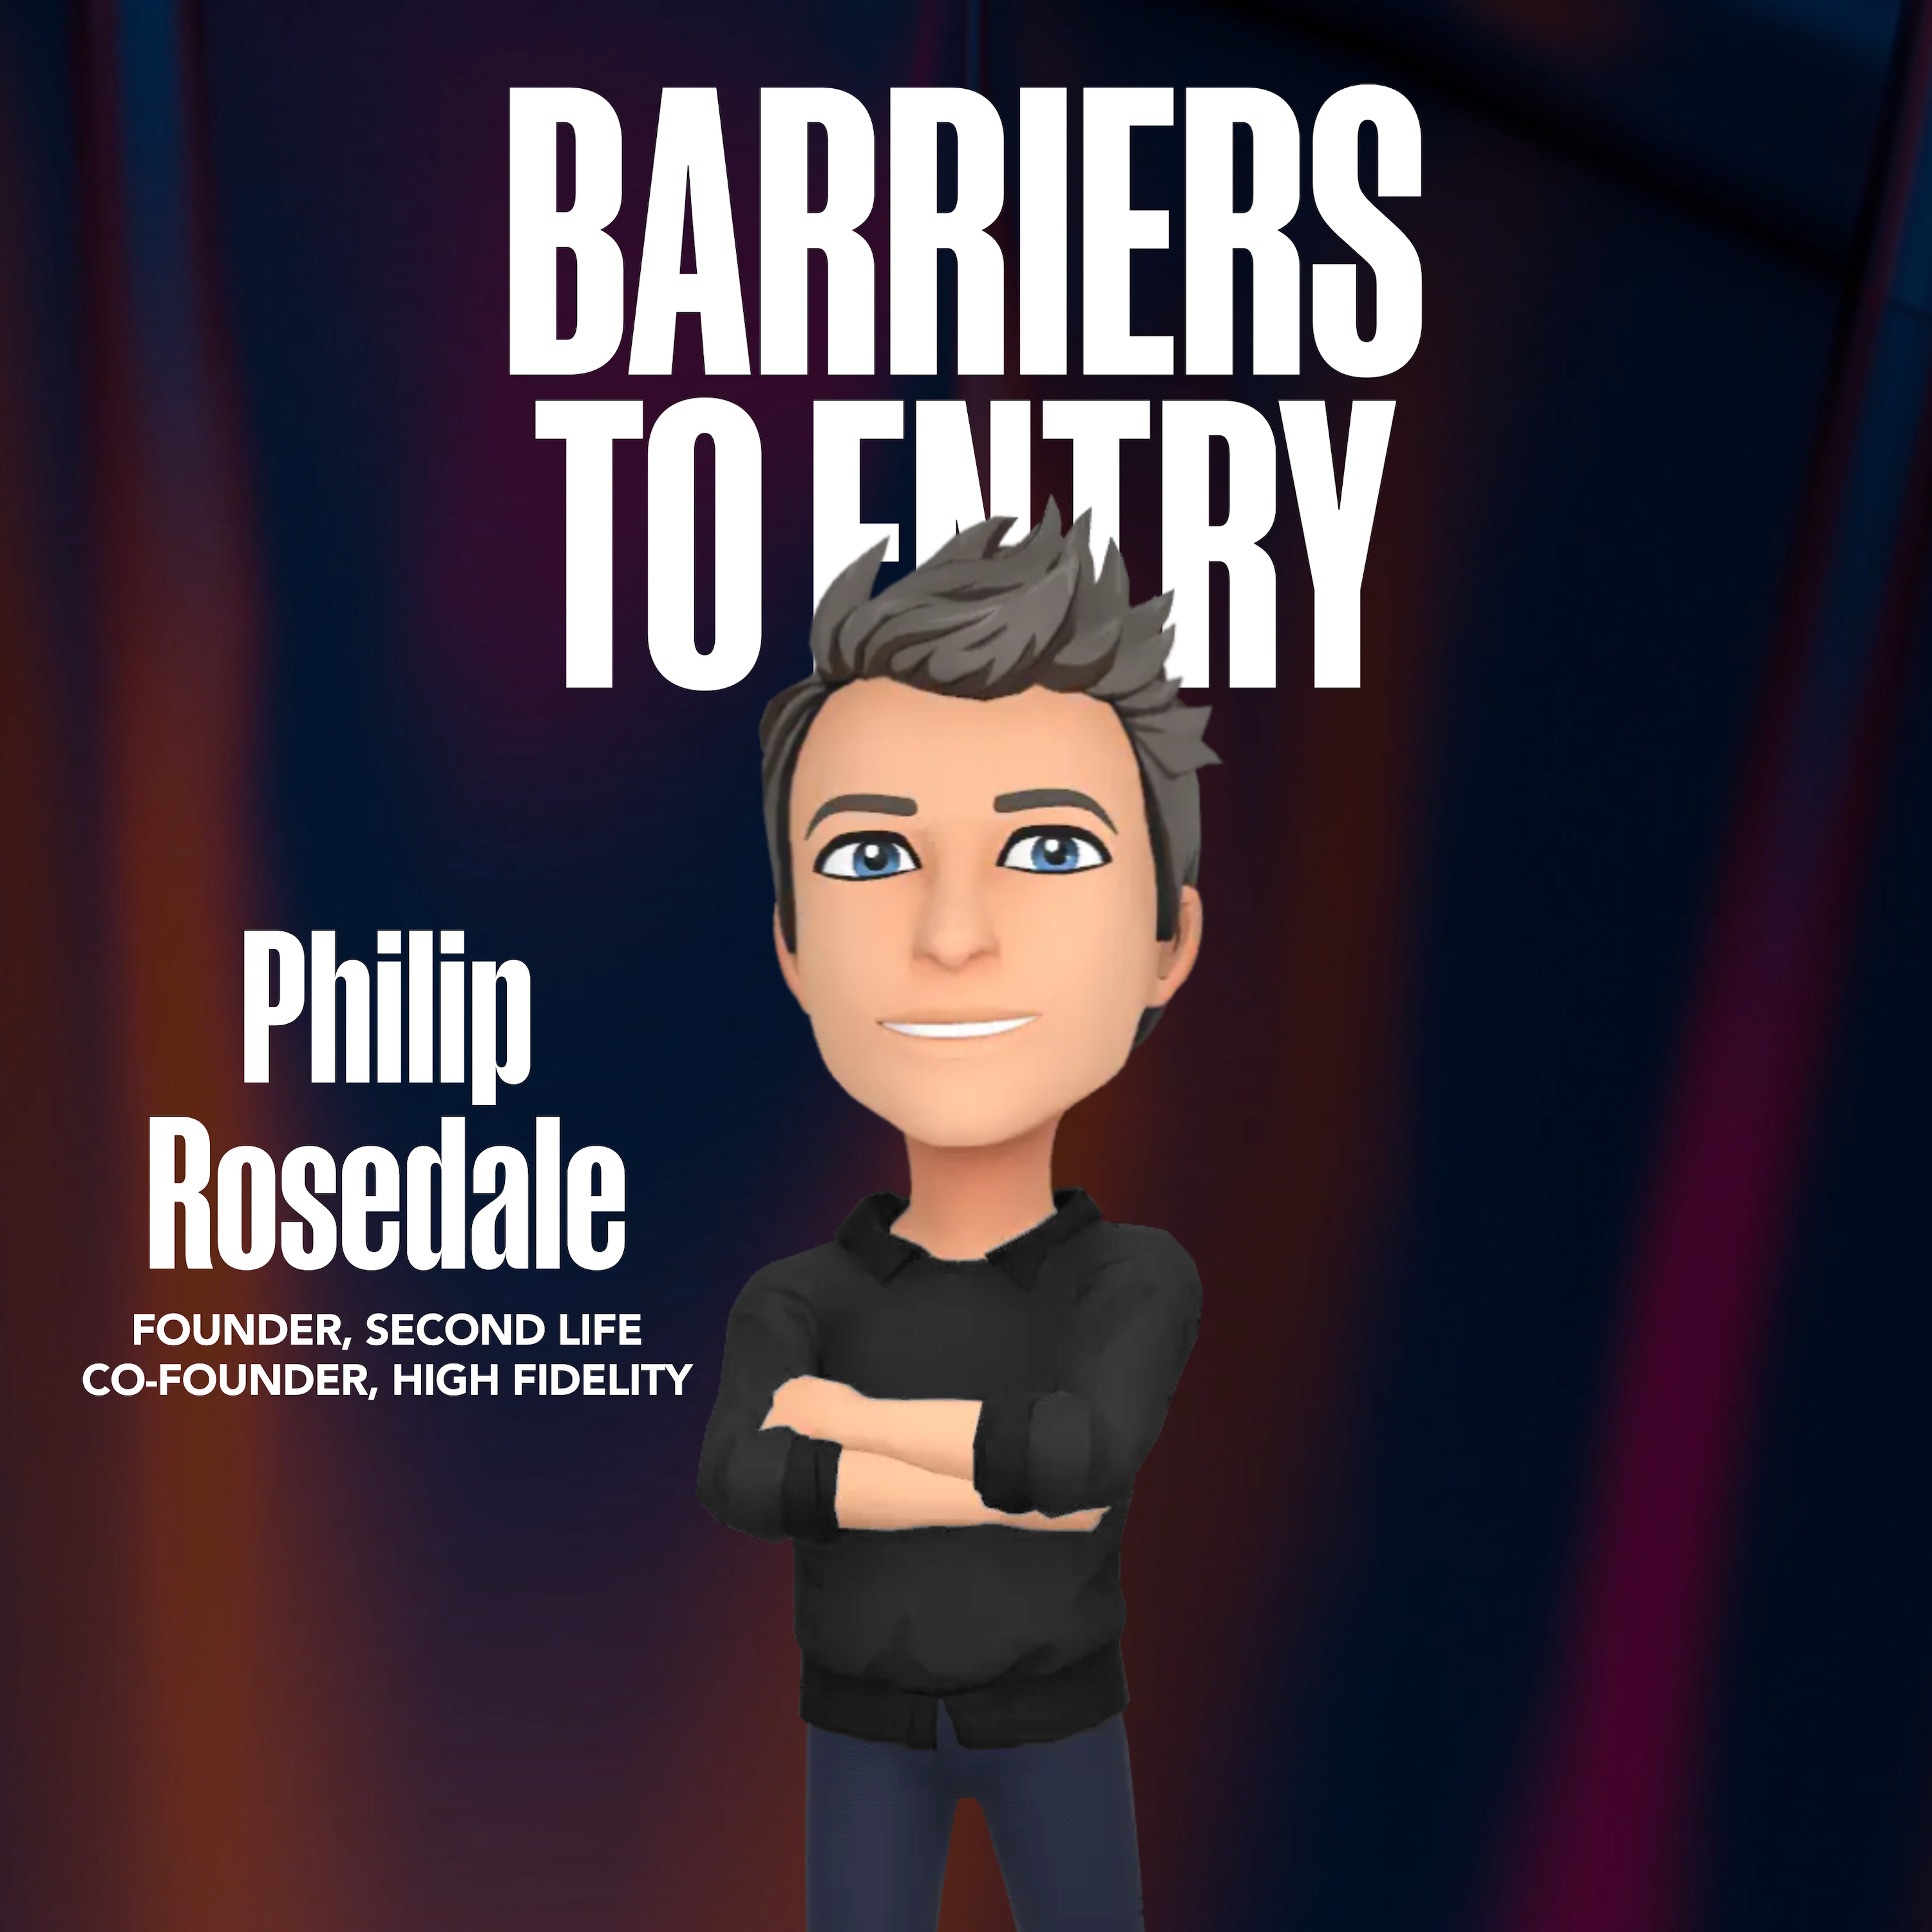 Philip Rosedale on the cover of the Barriers to Entry podcast episode artwork cover